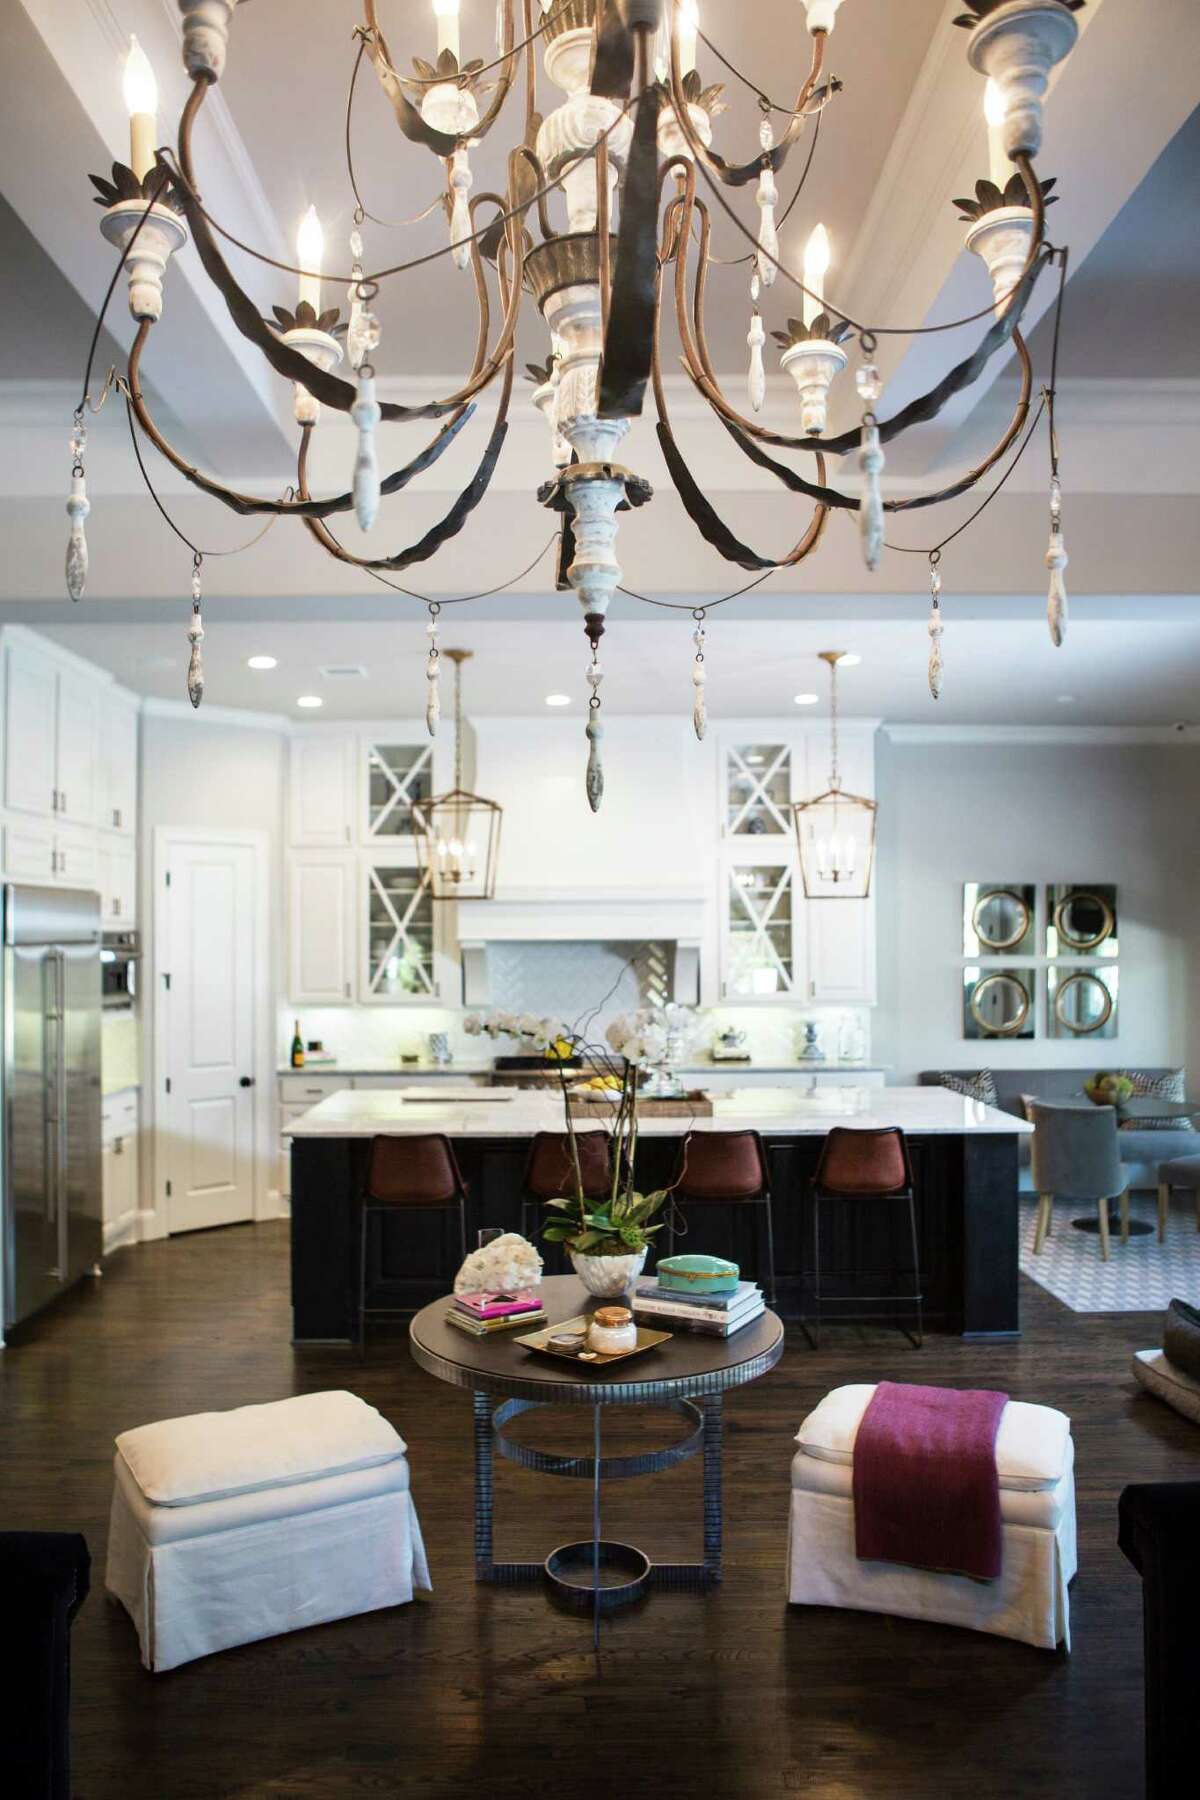 A small round table serves as a divider between the living room and open kitchen. The kitchen, with its marble island and white cabinets, is big and bright and helps open up the back half of the house.